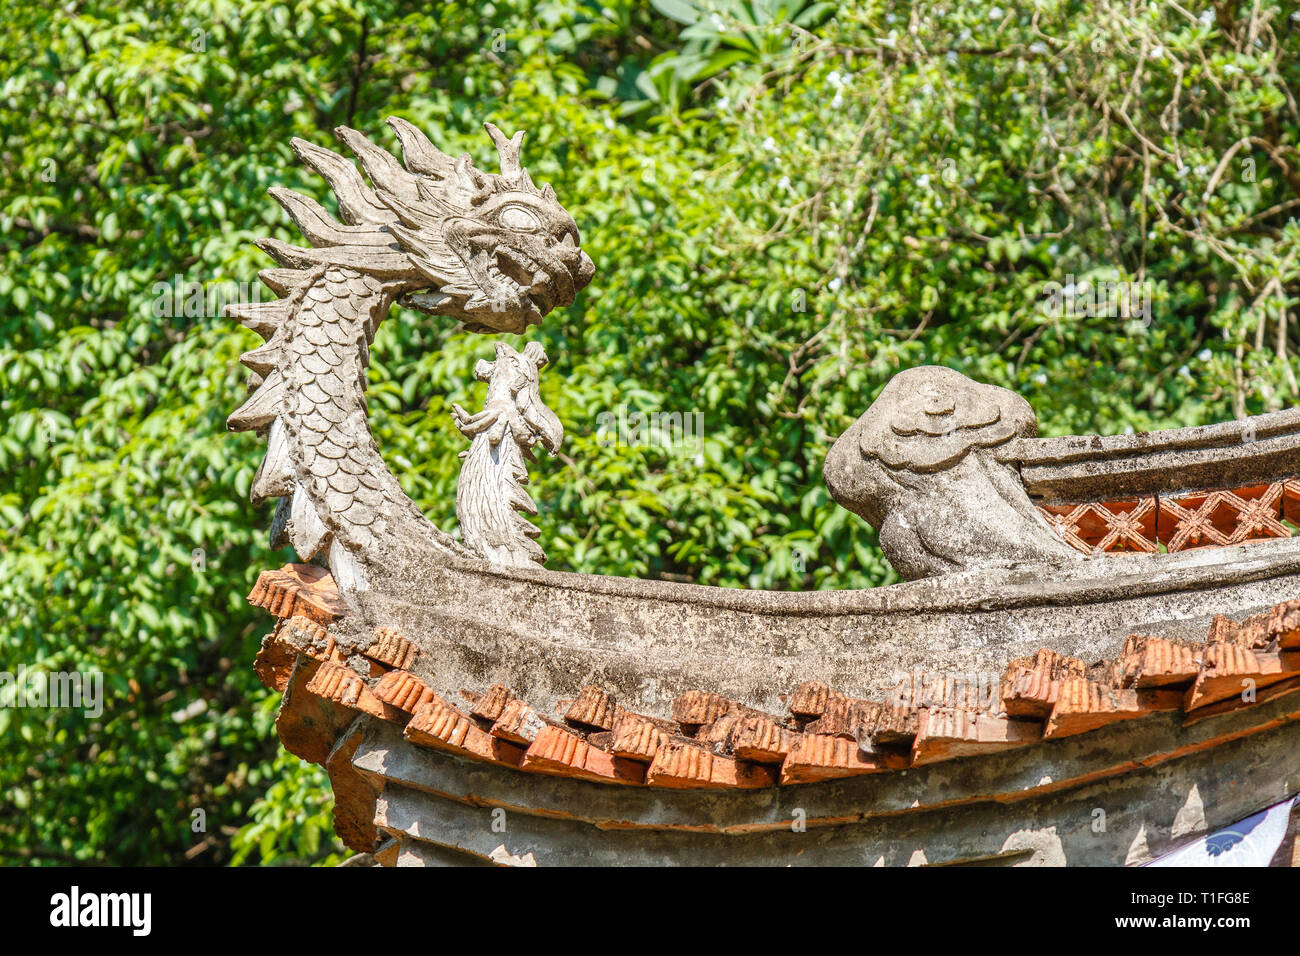 Dragon decoration on the roofs at Huong Pagoda or Perfume Pagoda, My Duc District, Vietnam. Stock Photo